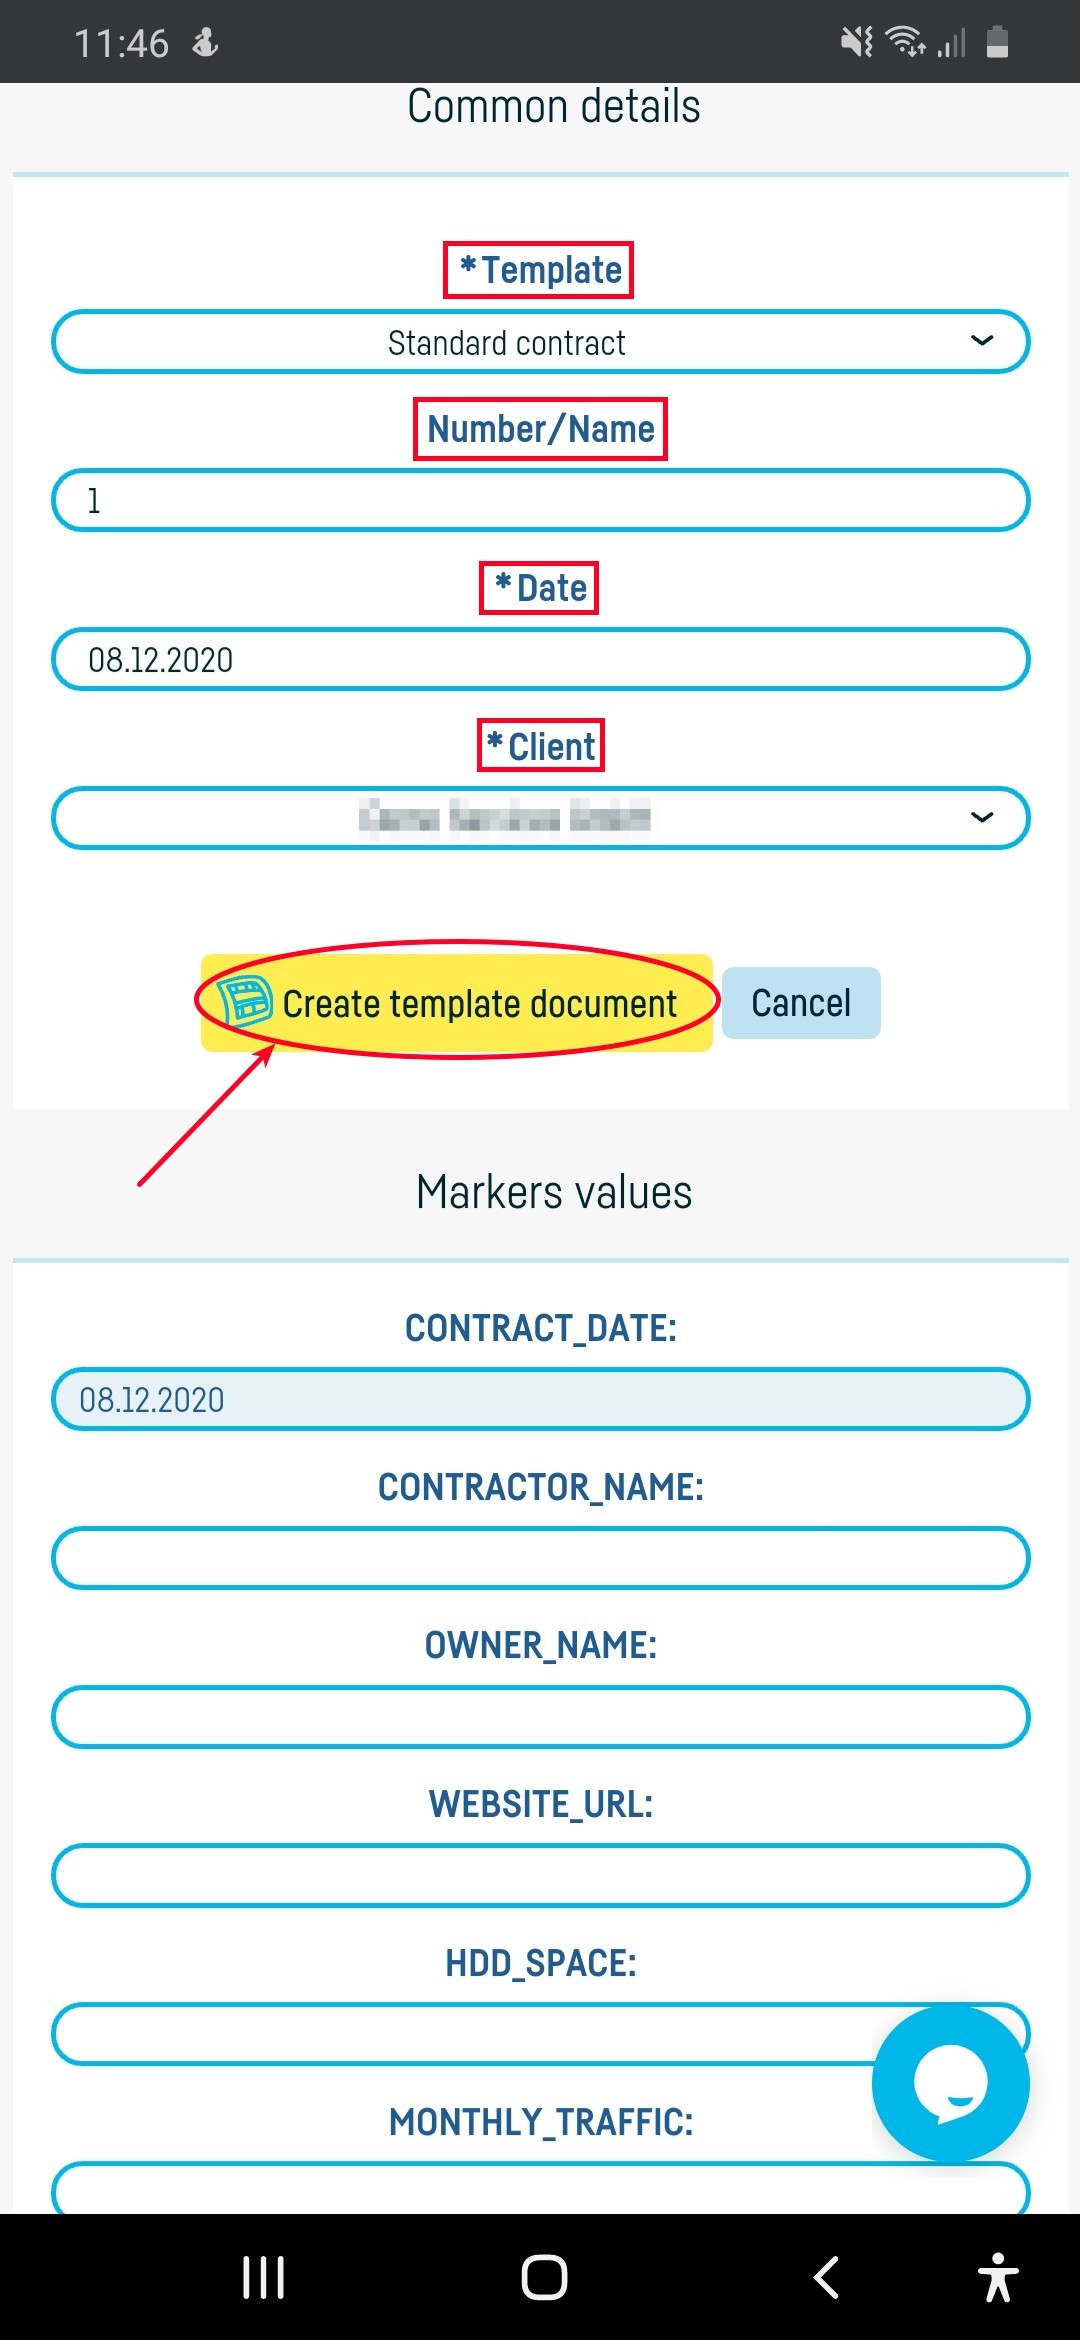 Generate a document from a standard document template - step 4